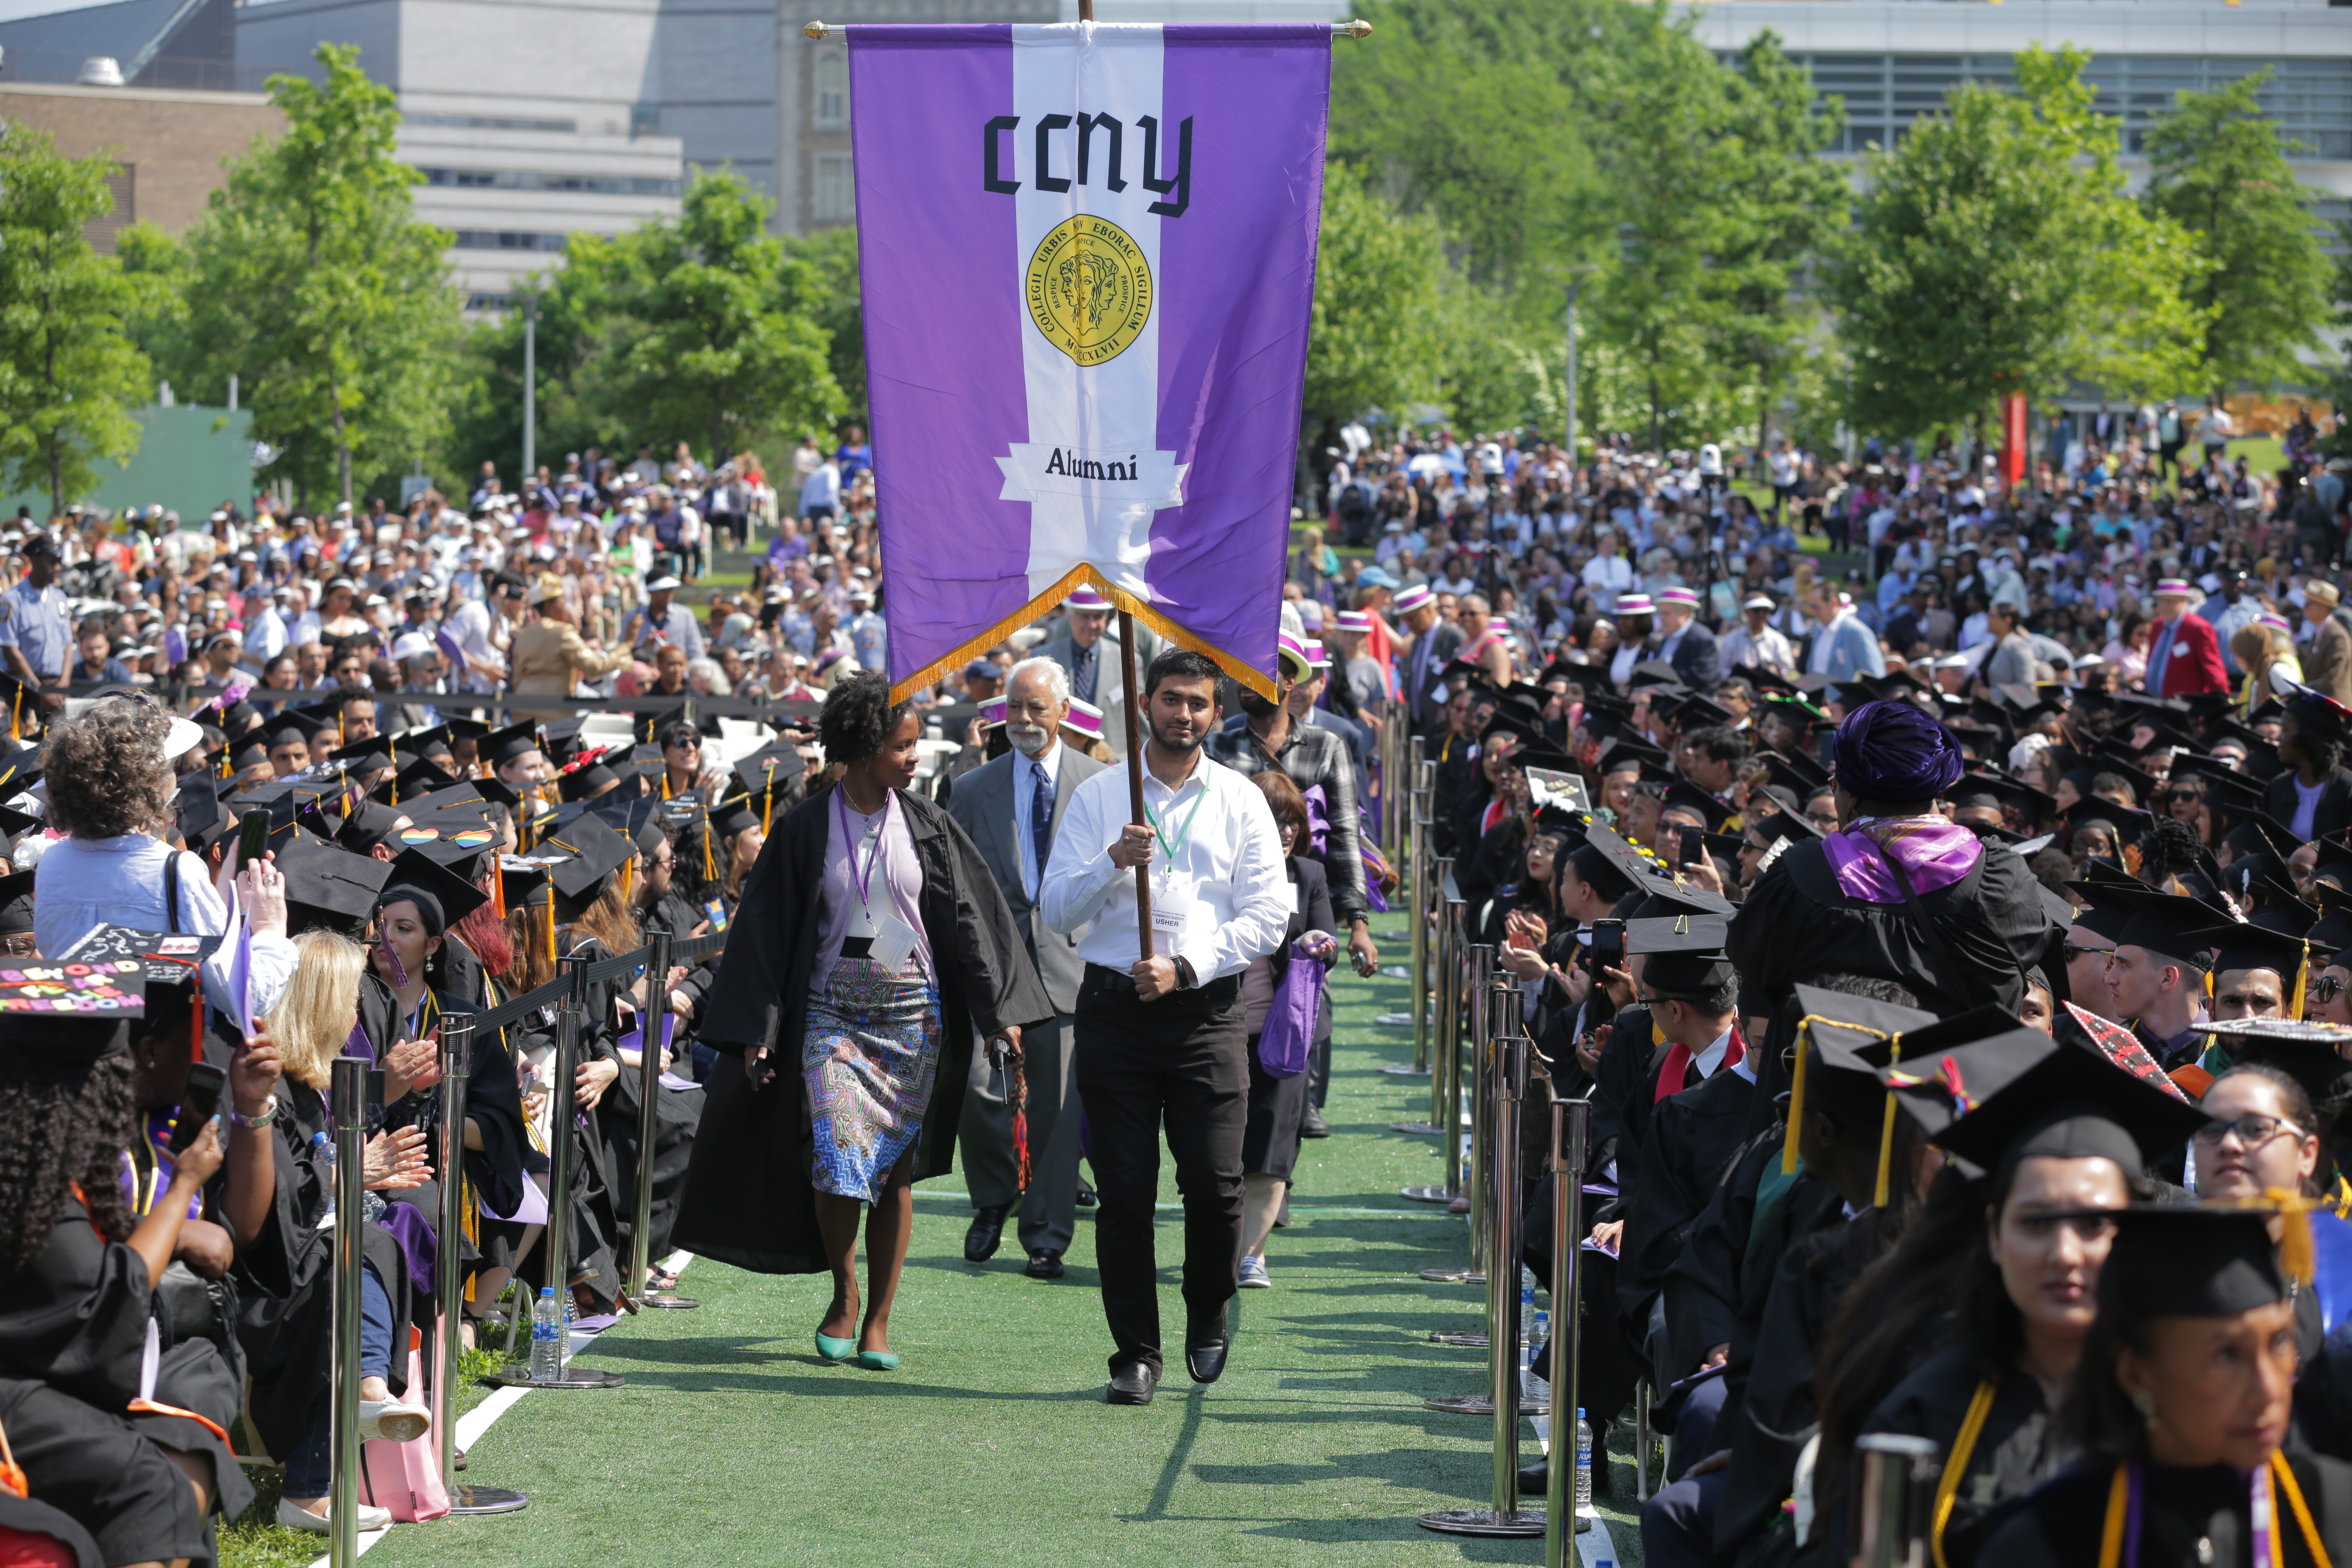 alumni marching at commencement day 2019